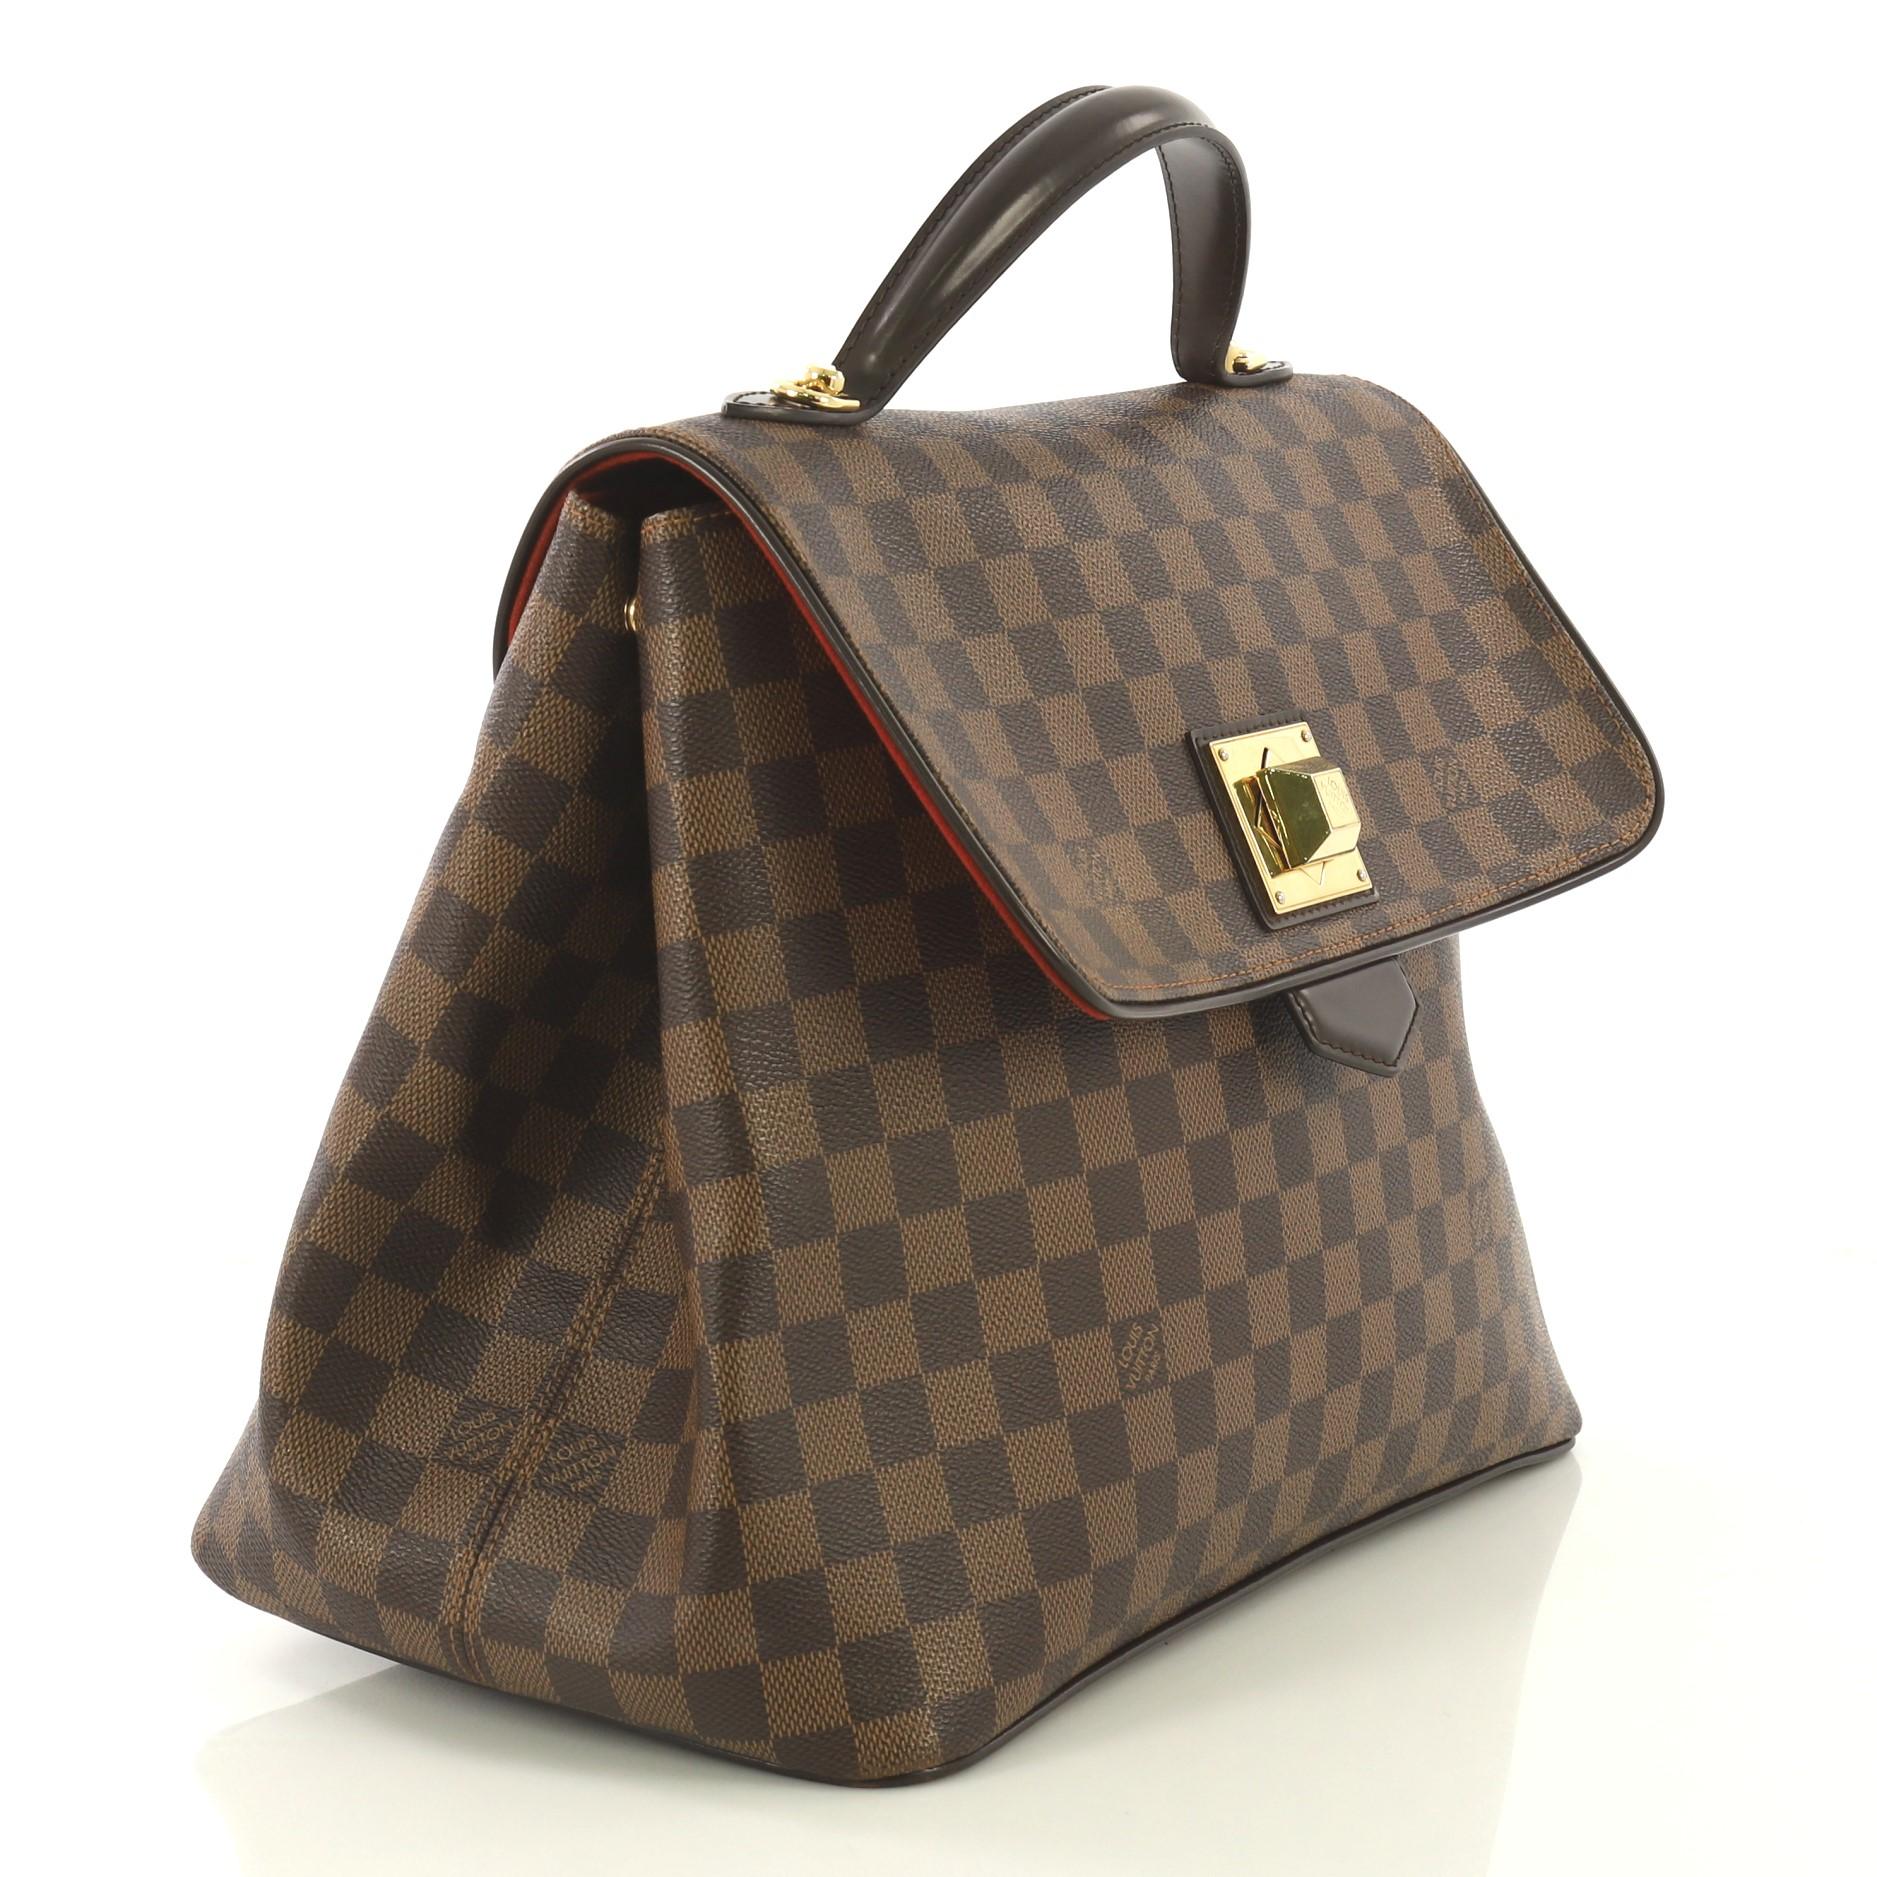 This Louis Vuitton Bergamo Handbag Damier GM, crafted from damier ebene coated canvas, features leather top handle and gold-tone hardware. Its flap with turn-lock closure opens to a red microfiber interior with side slip pockets. Authenticity code